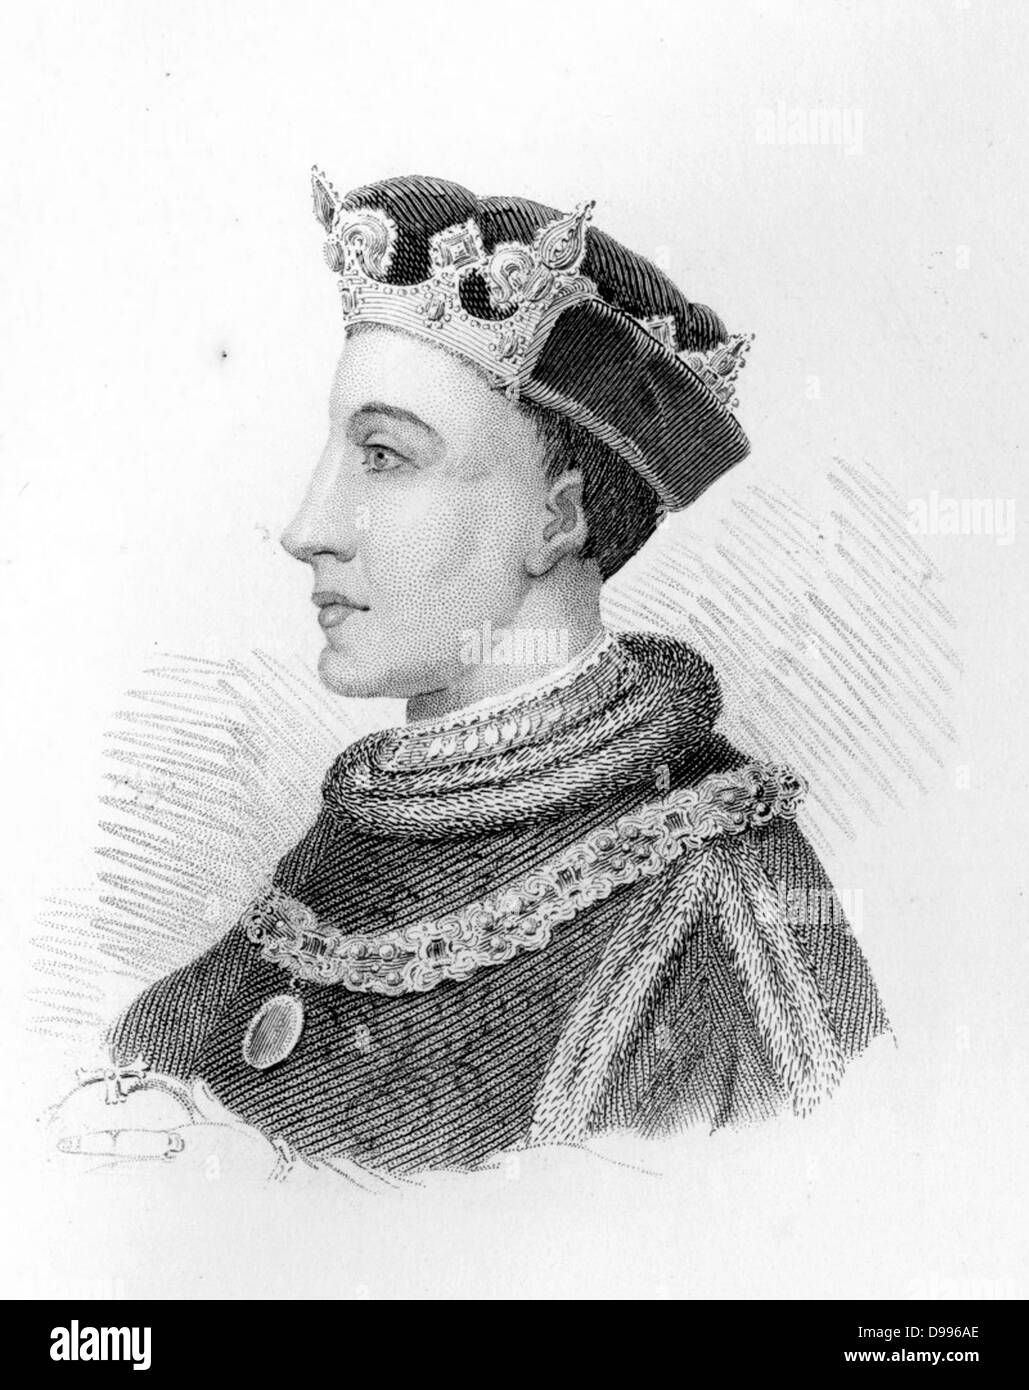 Henry V (16 September 1386 – 31 August 1422[1][2]) was King of England from 1413 until his death at the age of 35 in 1422. He was the second English monarch who came from the House of Lancaster. Stock Photo